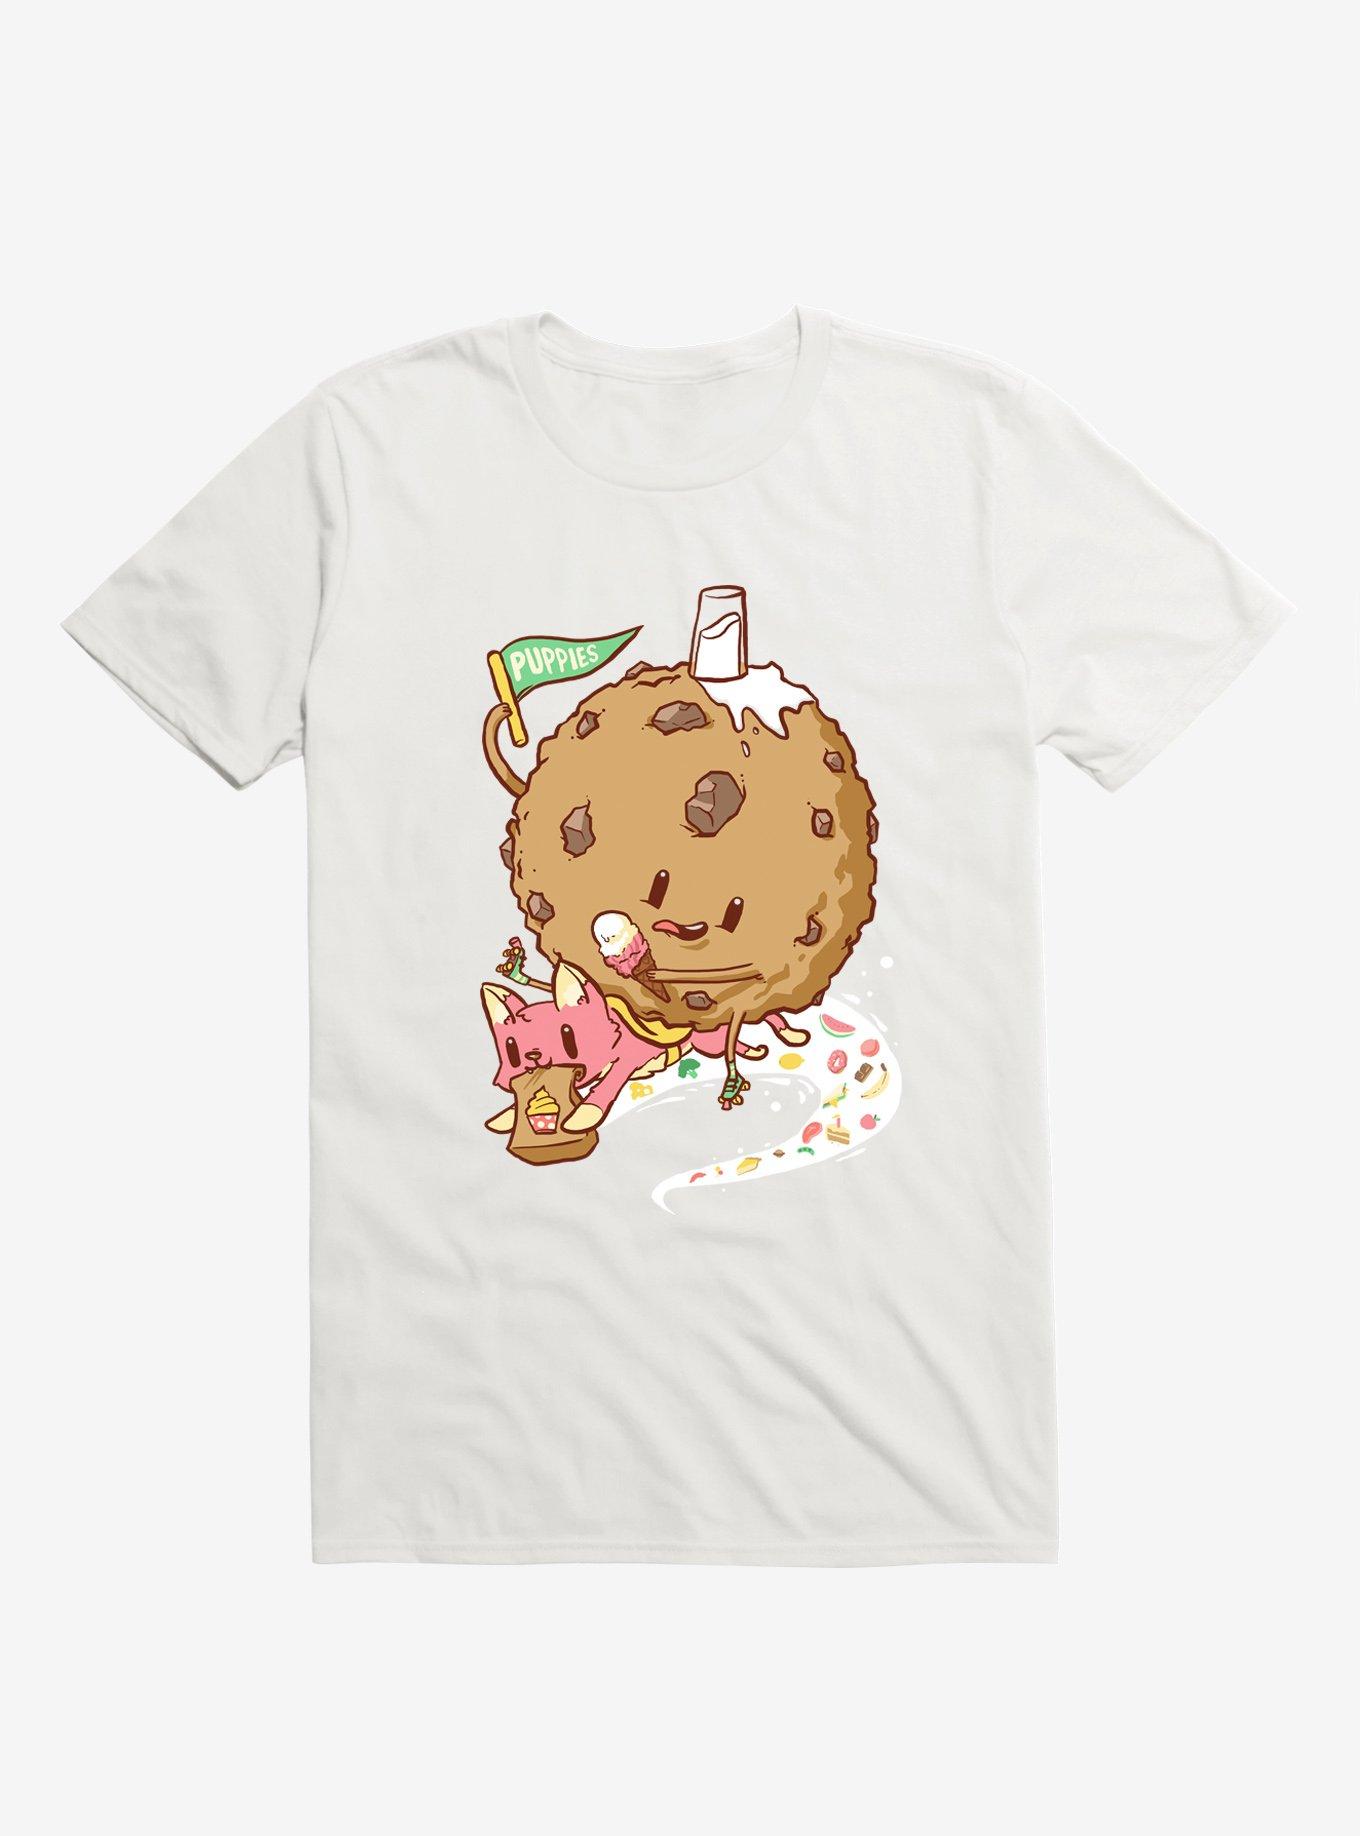 Cake Delivery Cat White T-Shirt, , hi-res